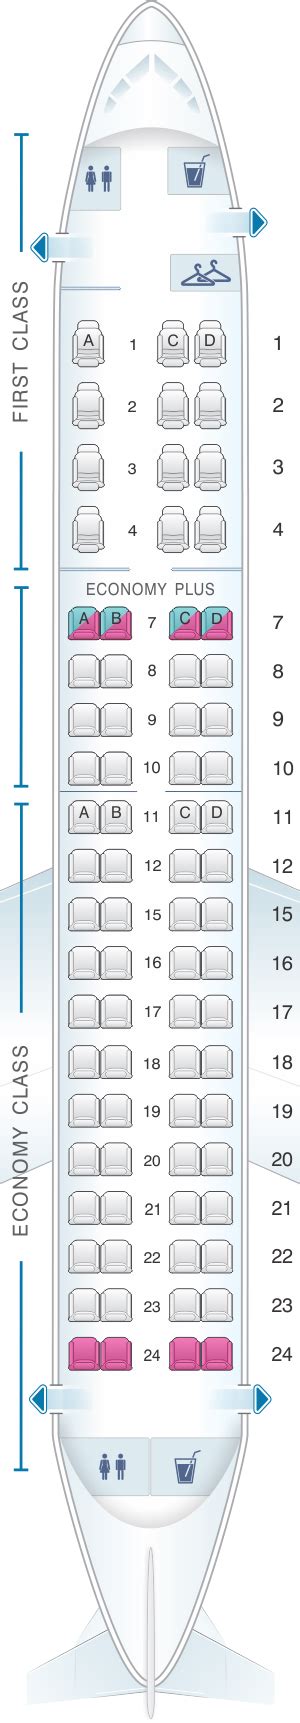 embraer 175 united seat map